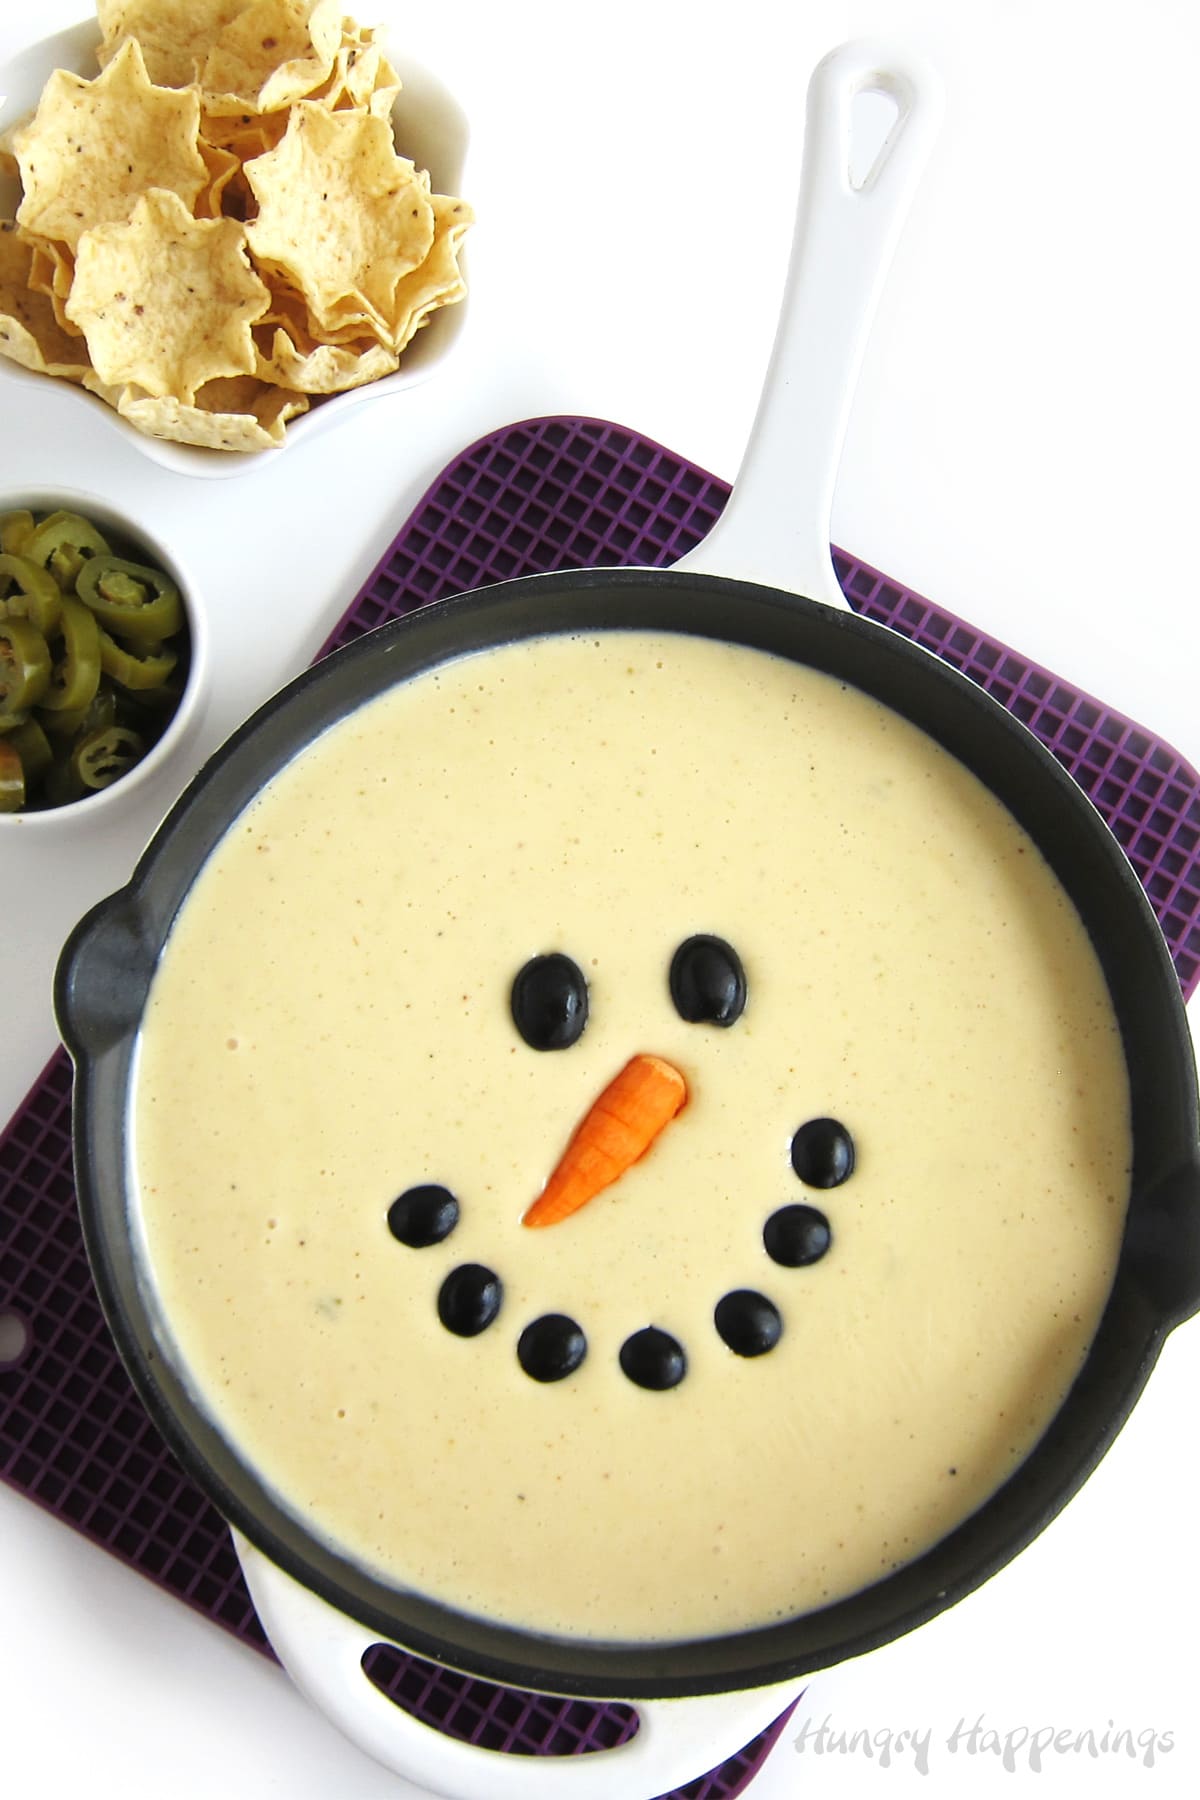 White queso dip snowman served in a skillet with tortilla chips and jalapenos